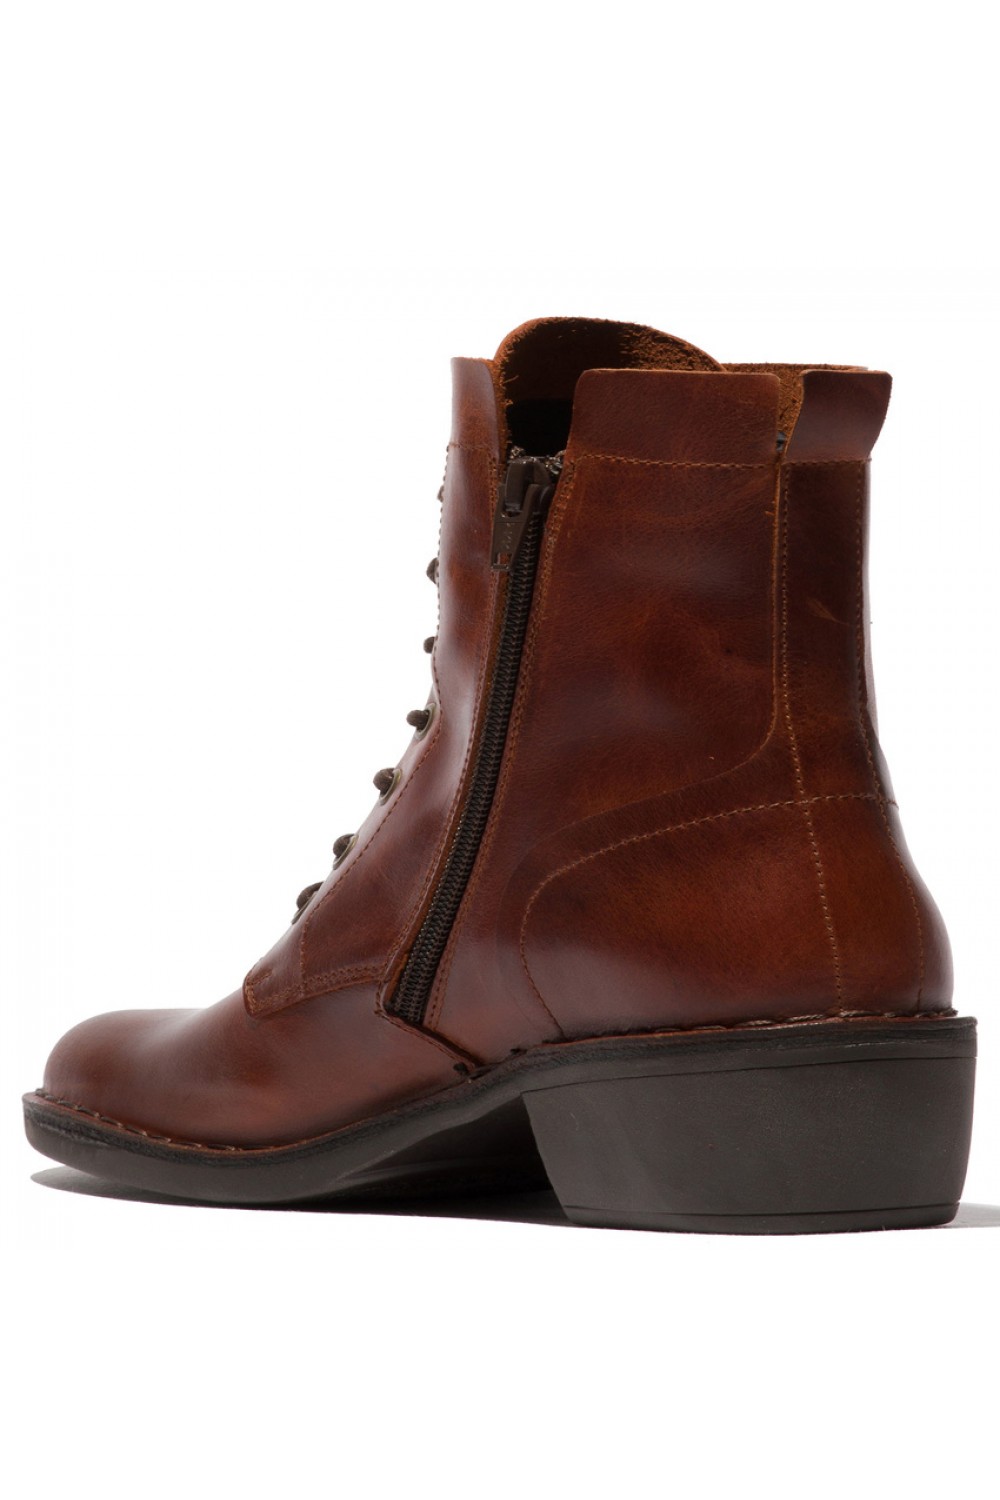 FLY LONDON MiluO44 Leather Lace Up Ankle Boot Brick